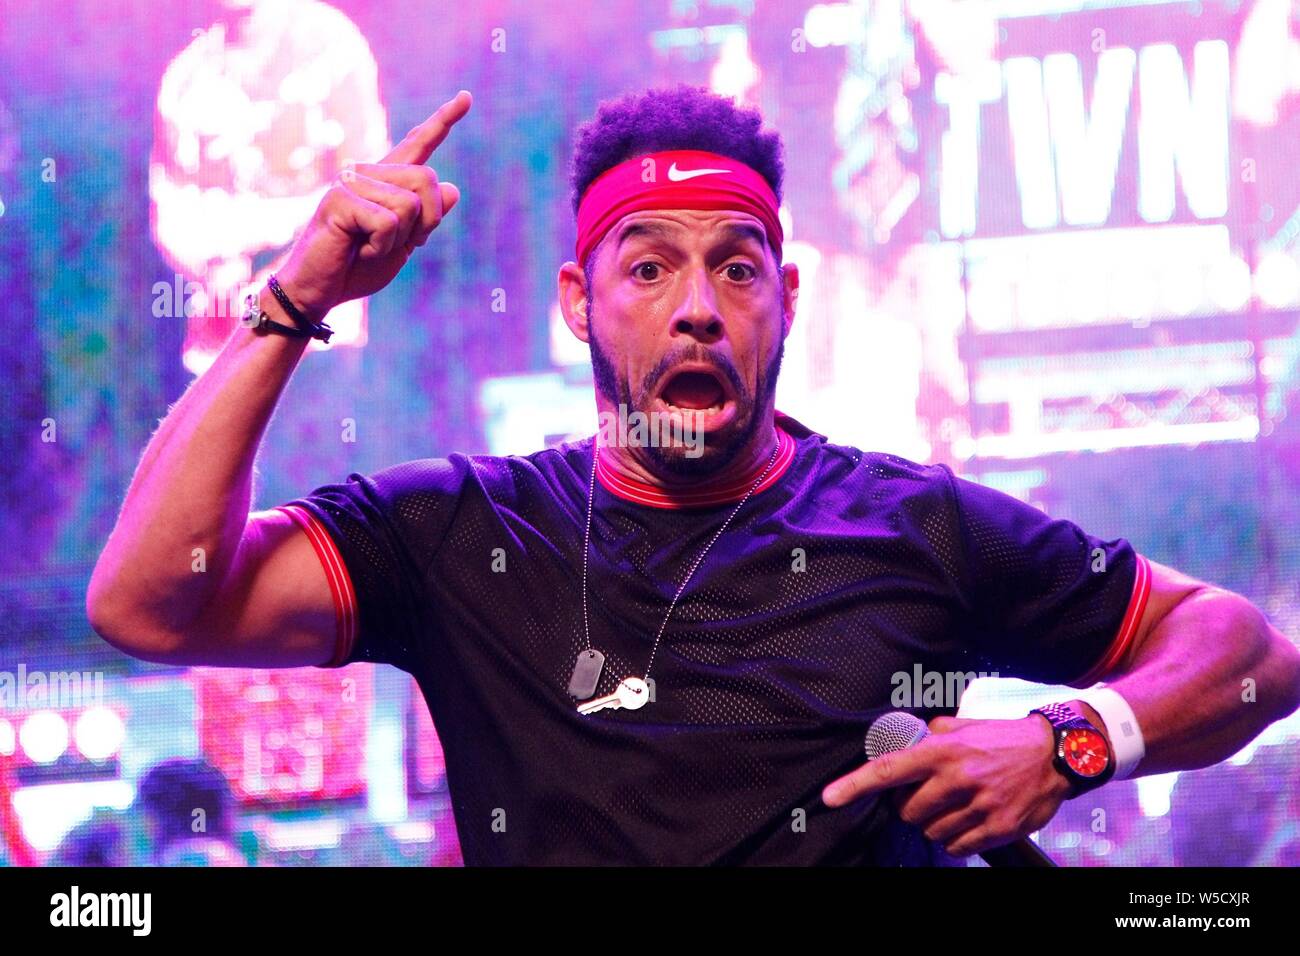 Las Vegas, USA. 27th July, 2019. Trevor Penick of O-Town on stage for Pop  2000 Tour Concert, Fremont Street Experience, Las Vegas, NV July 27, 2019.  Credit: Everett Collection Inc/Alamy Live News